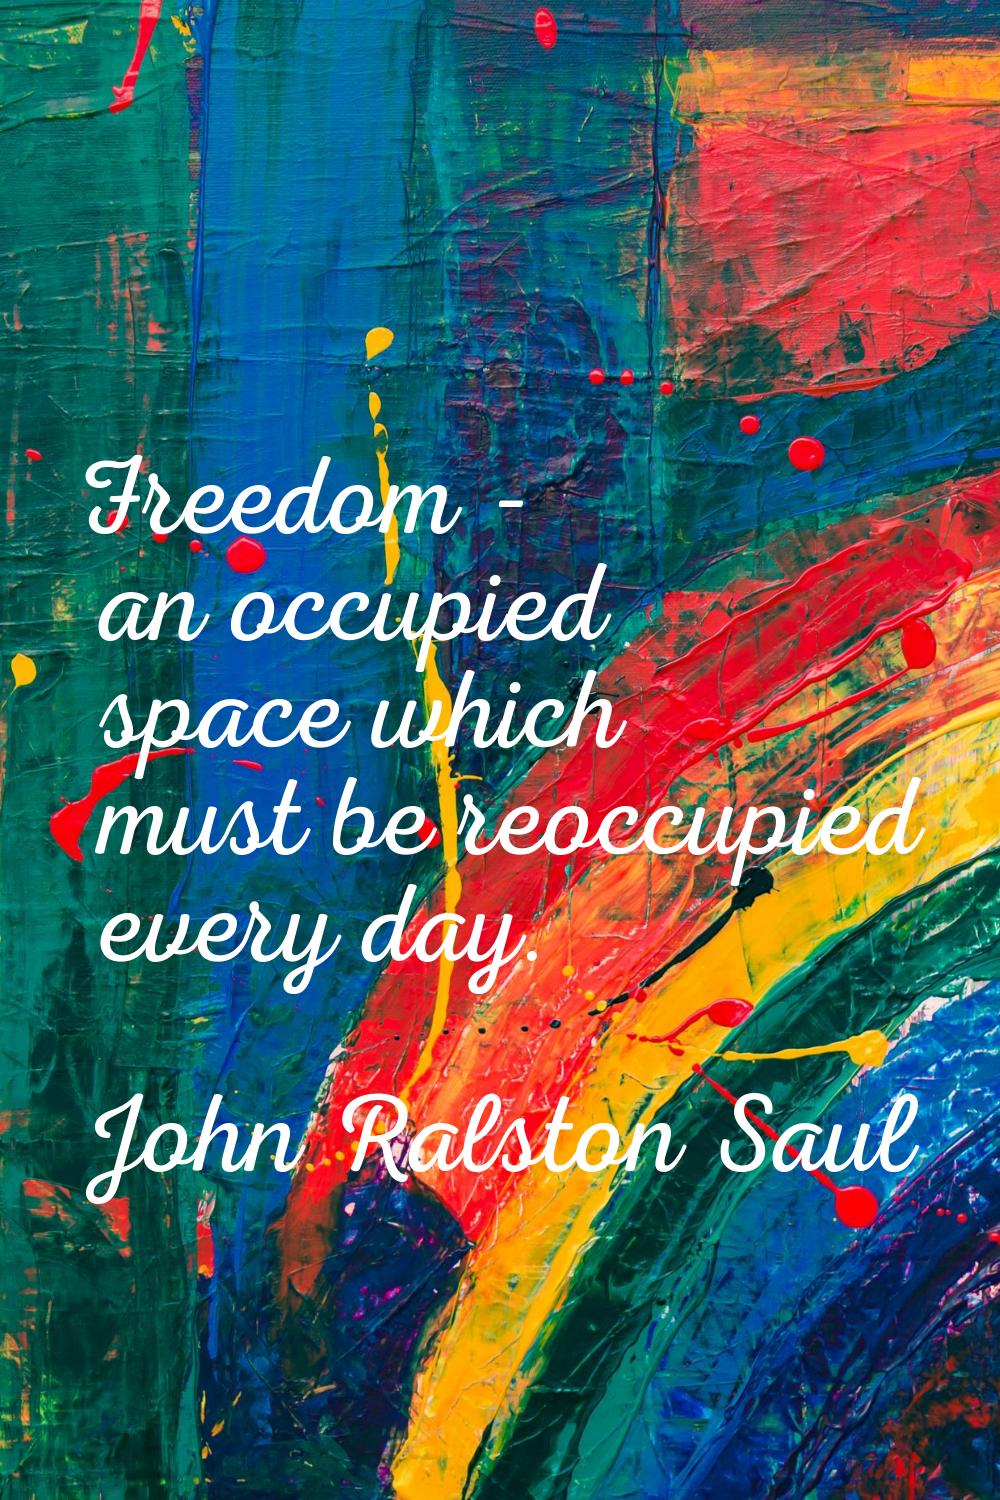 Freedom - an occupied space which must be reoccupied every day.